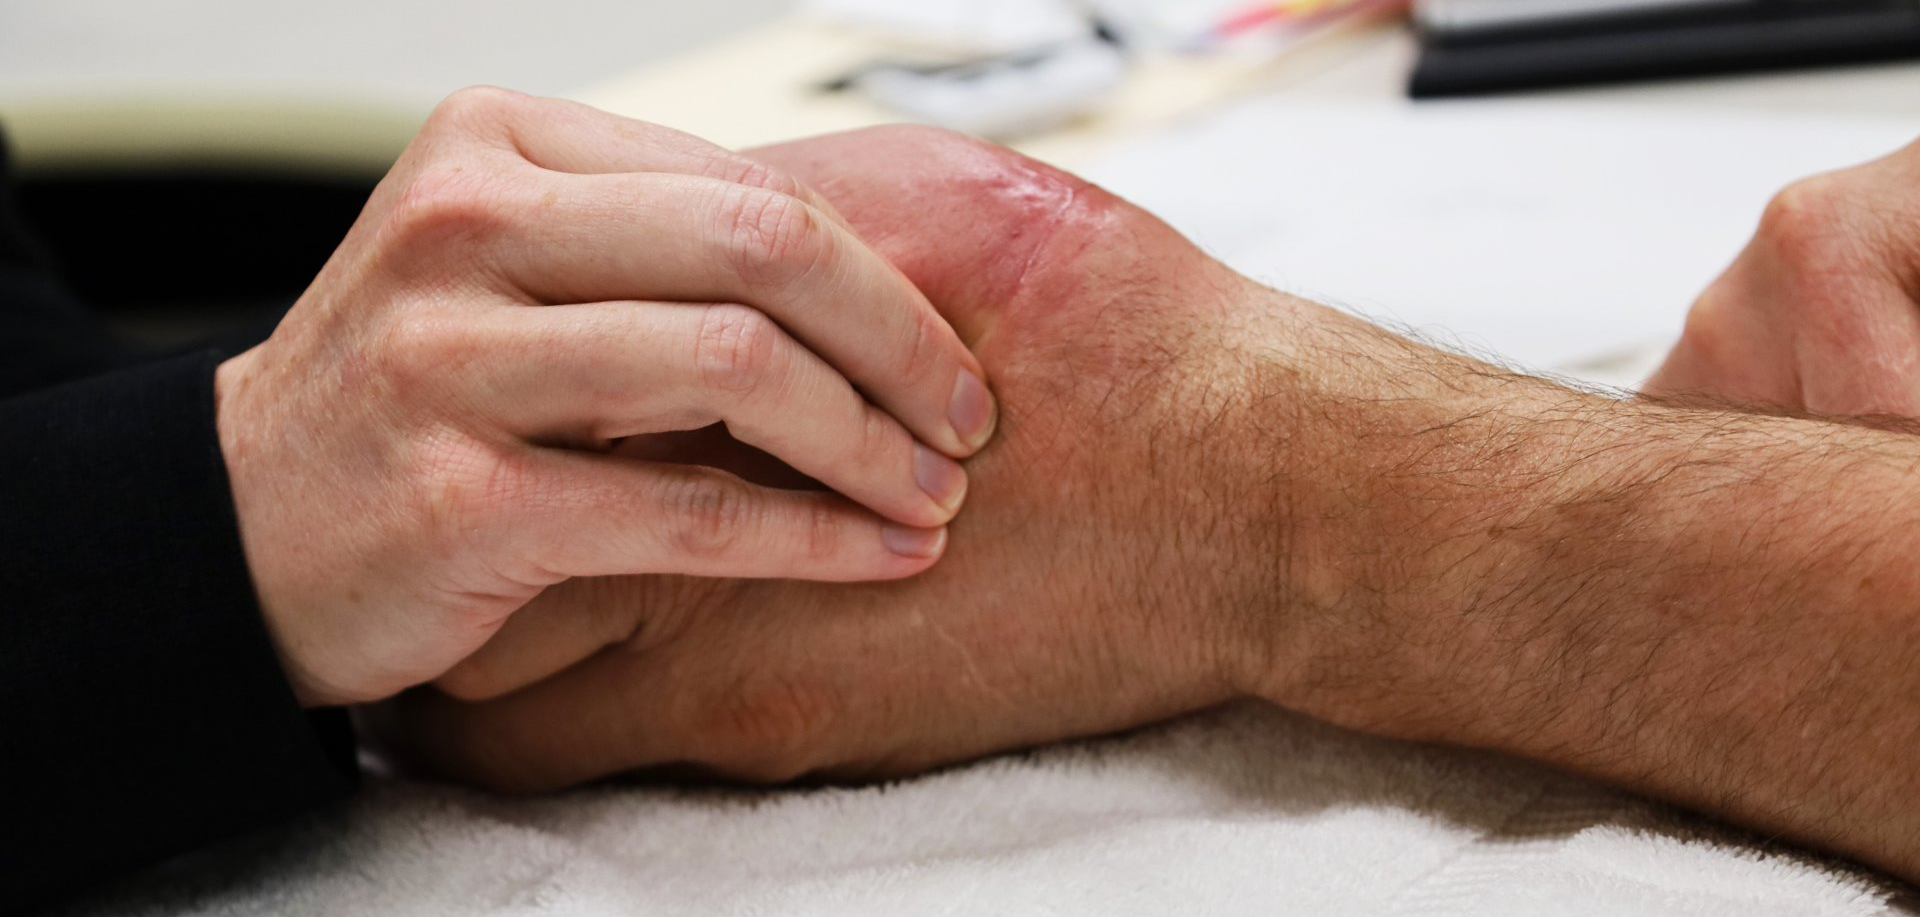 will hand injury or condition require physical therapy?